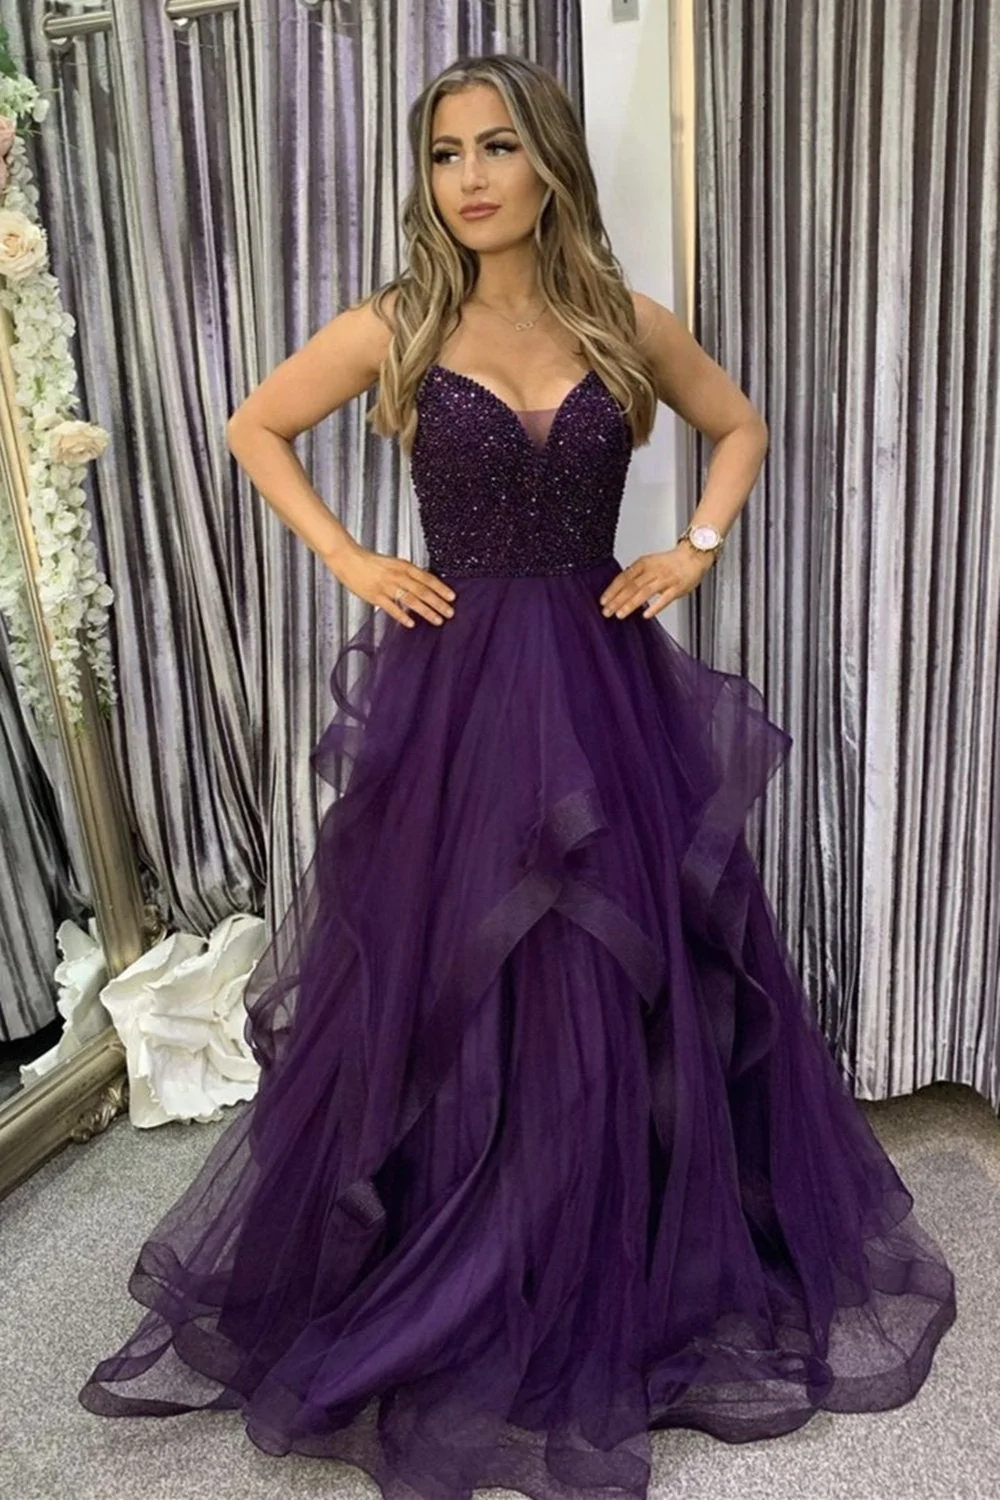 Fluffy A-line V neck Tulle Purple Formal Prom Dress with Beading,Party Dress nv298